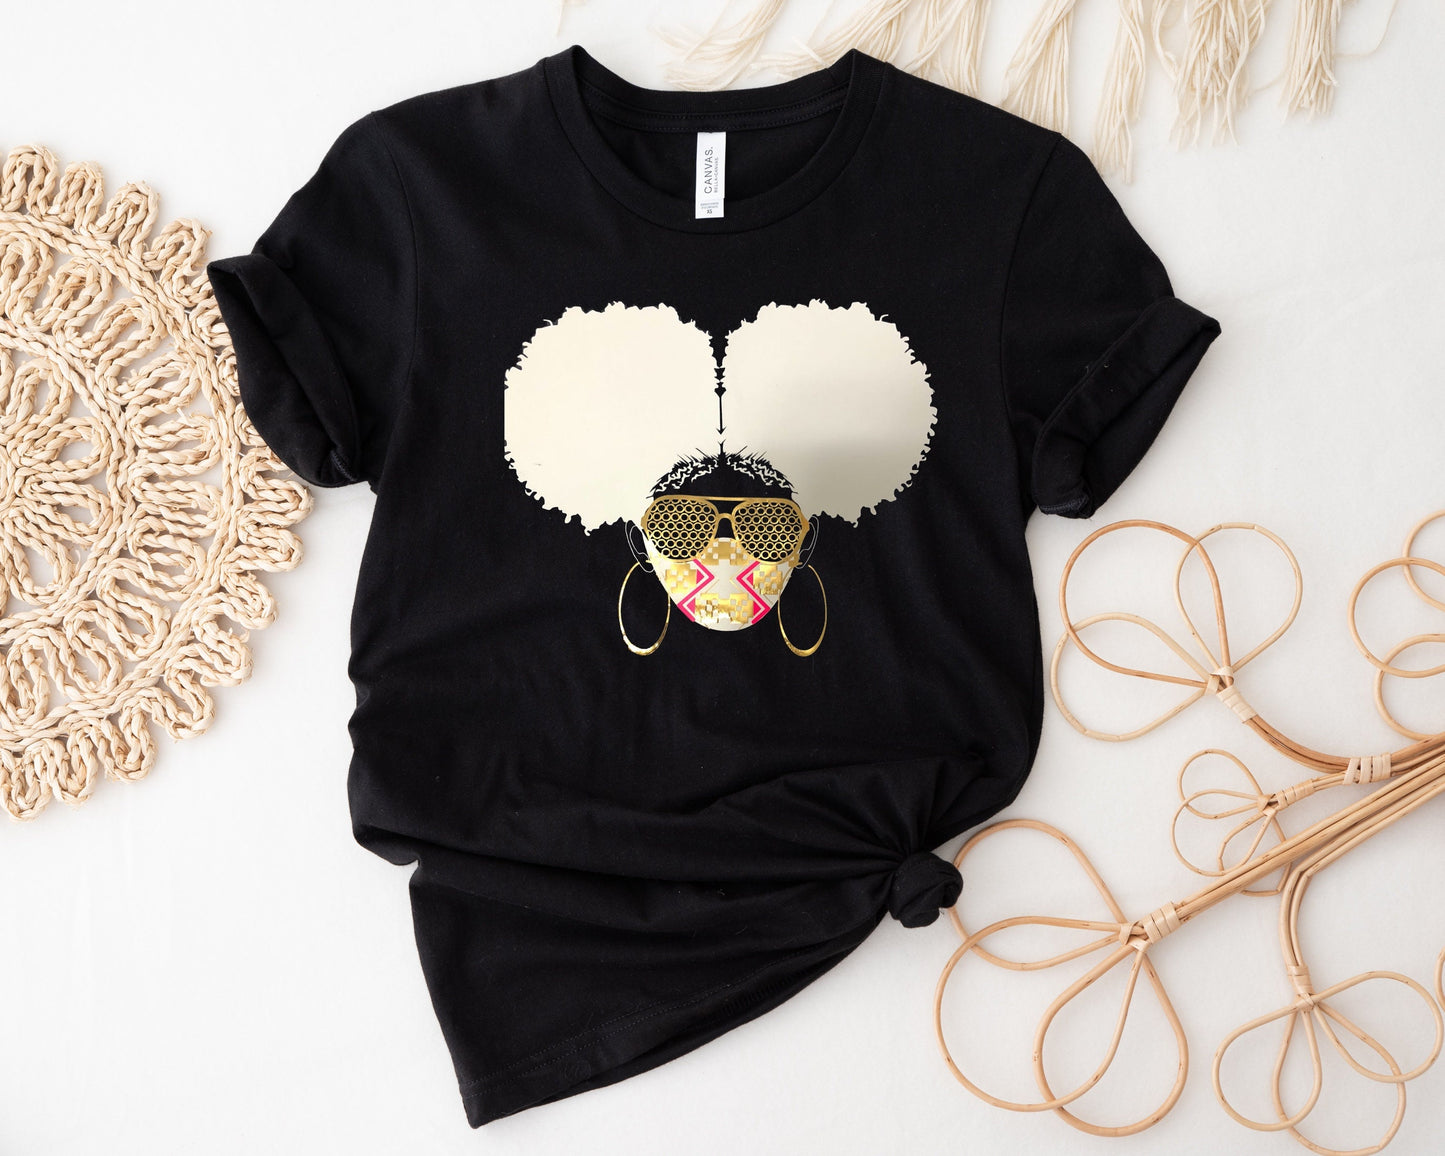 Natural hair, Afro puffs, black queen, Afro-Latina t-shirt, African American strong woman, celebrate your curls